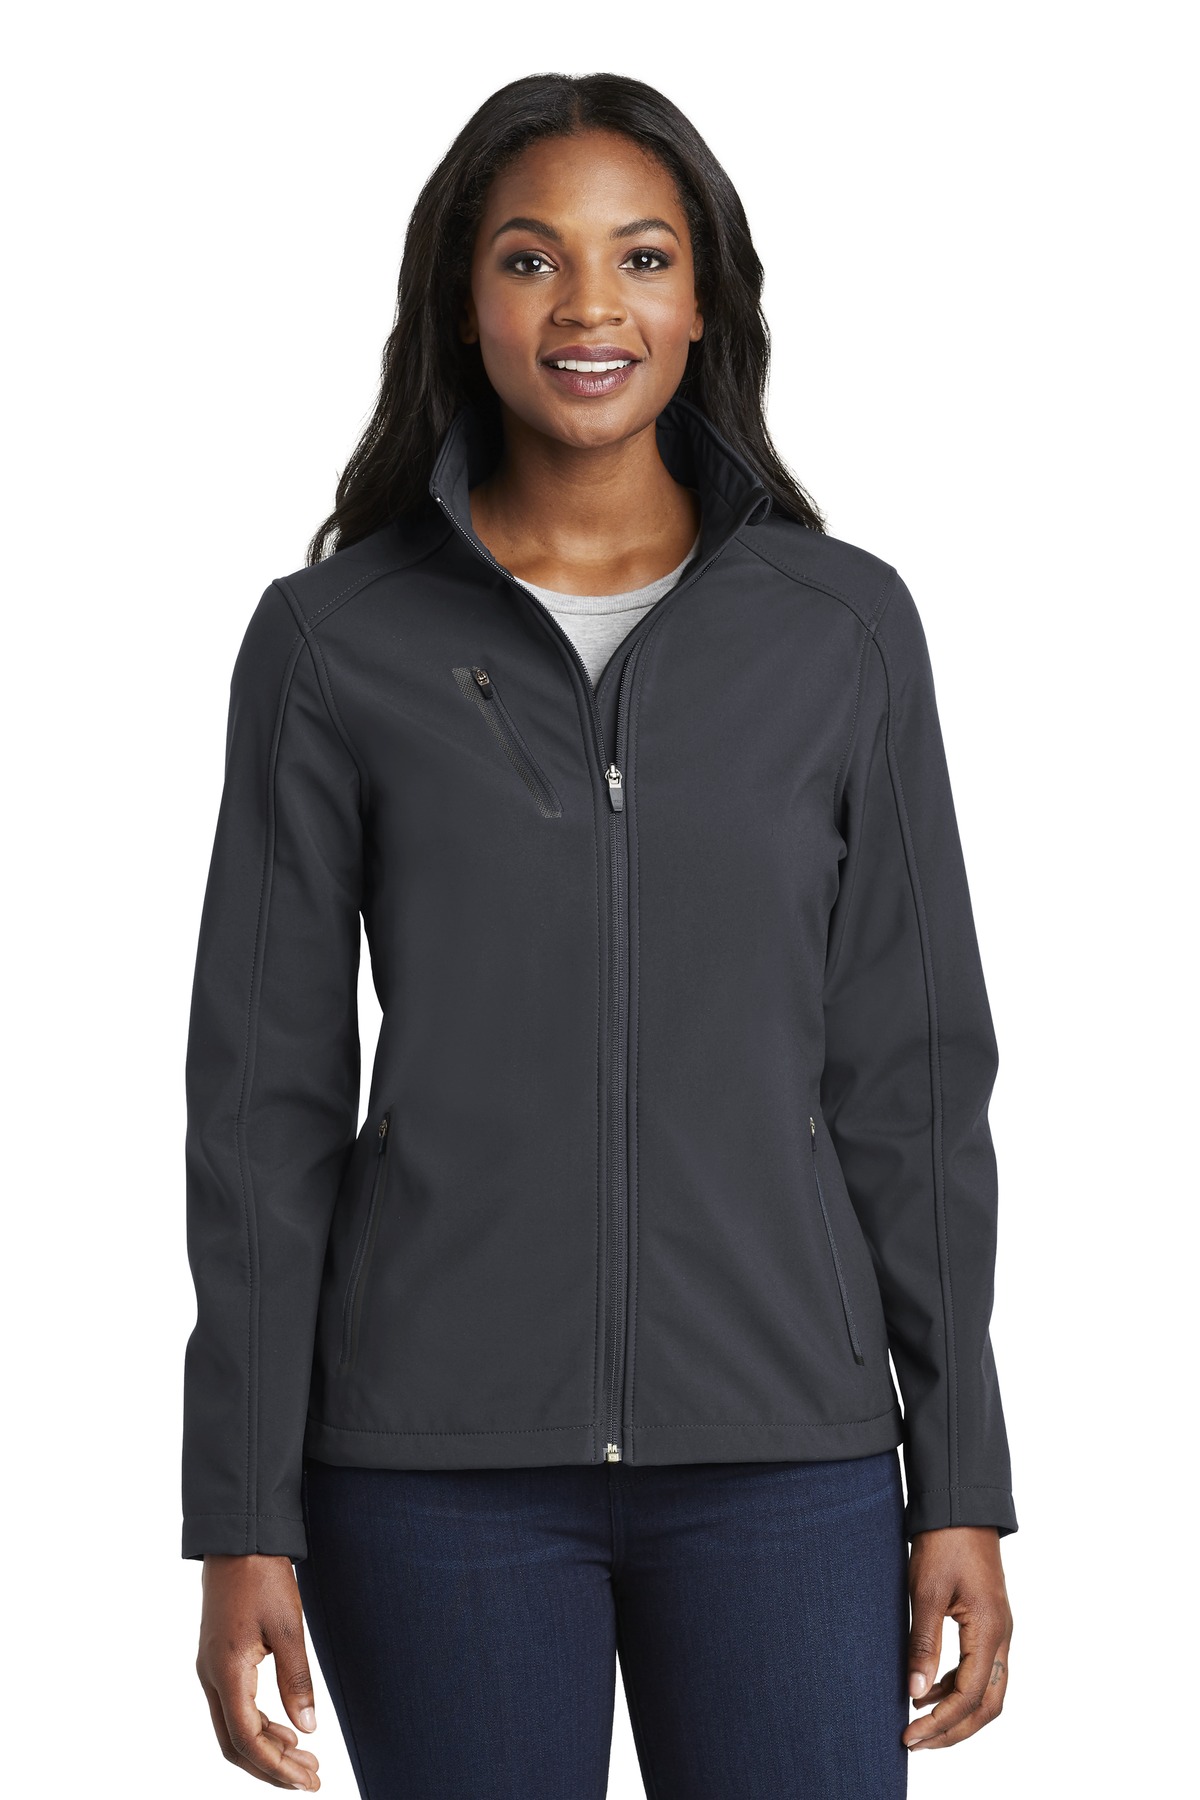 Port Authority Ladies Welded Soft Shell Jacket-